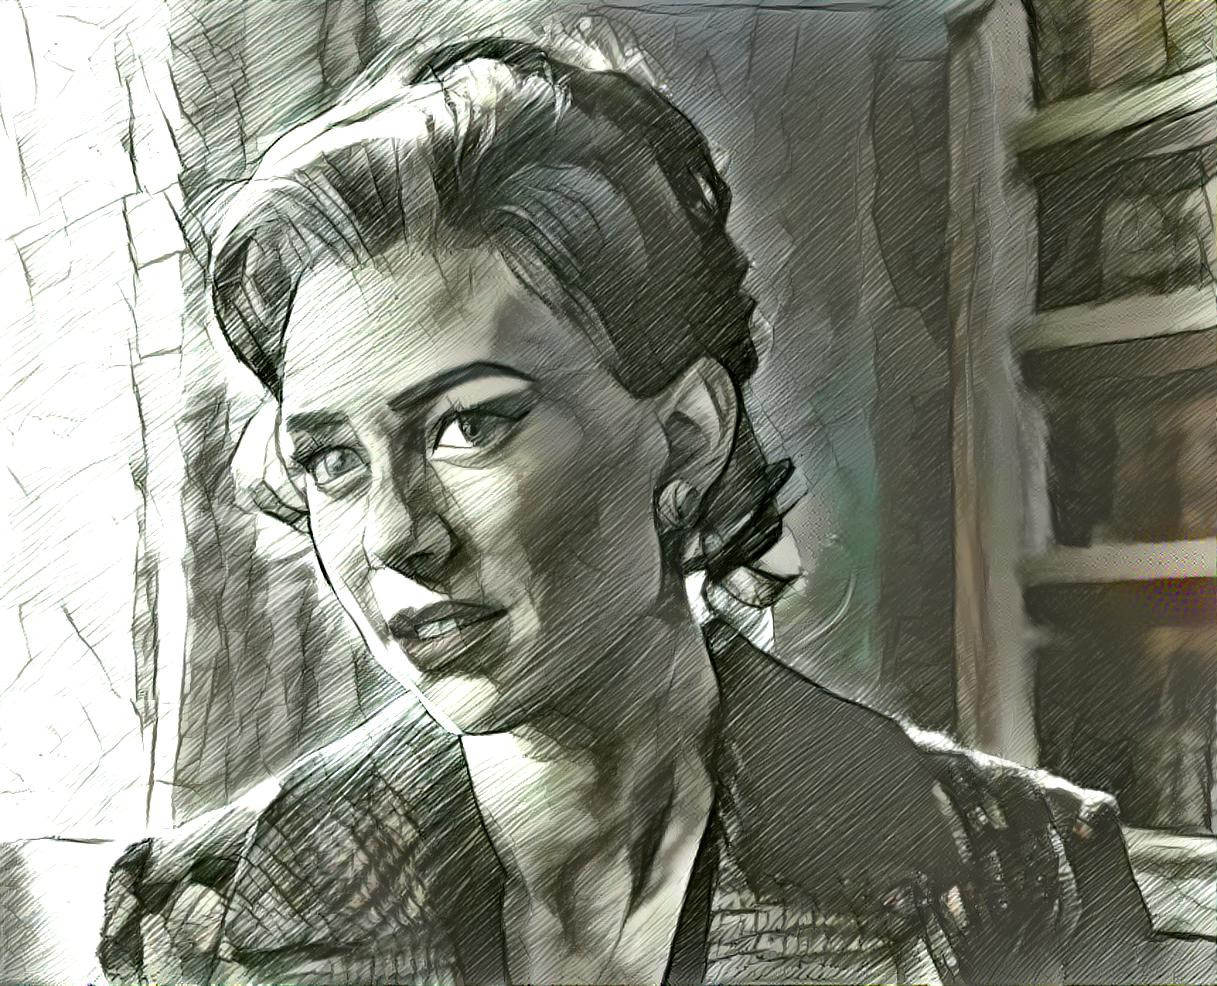 vanessa kirby - the crown 2